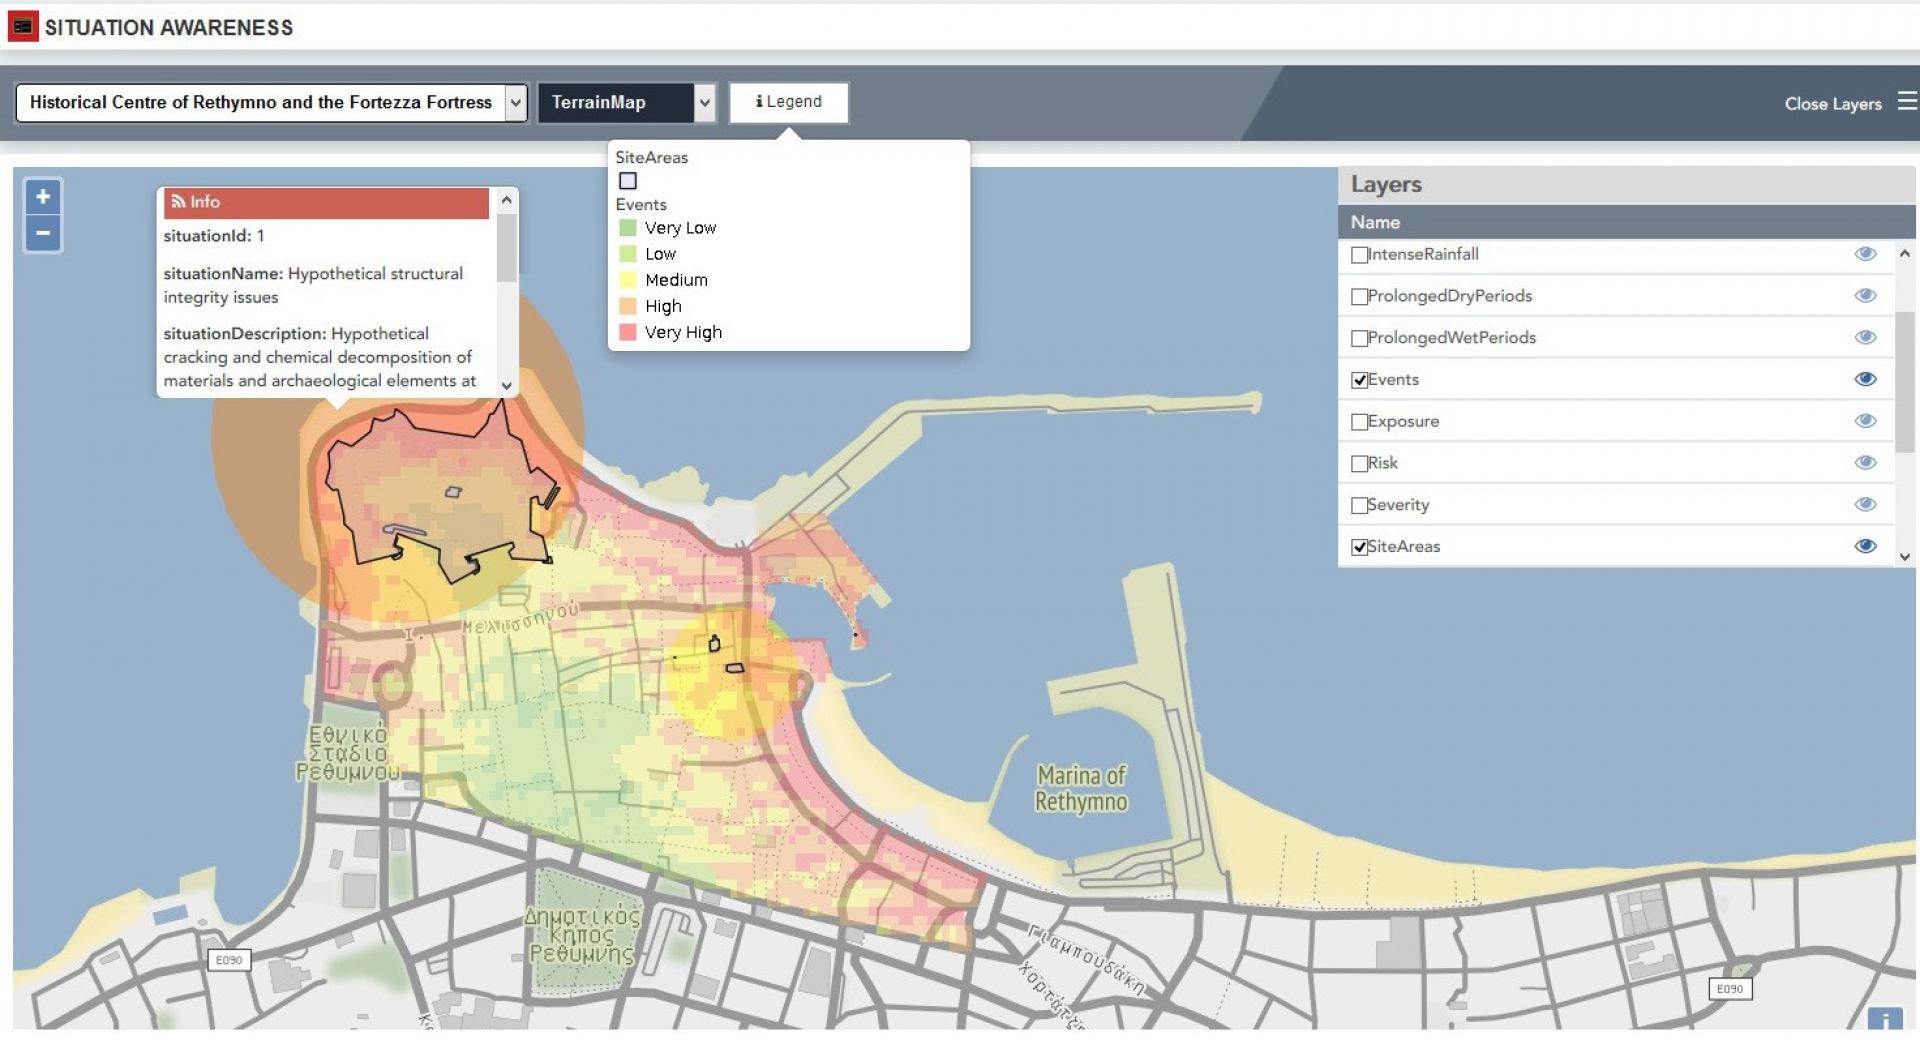 Situation awareness displayed through layers on a map, including Events, Exposure, Risk, Severity, Site Areas, etc.